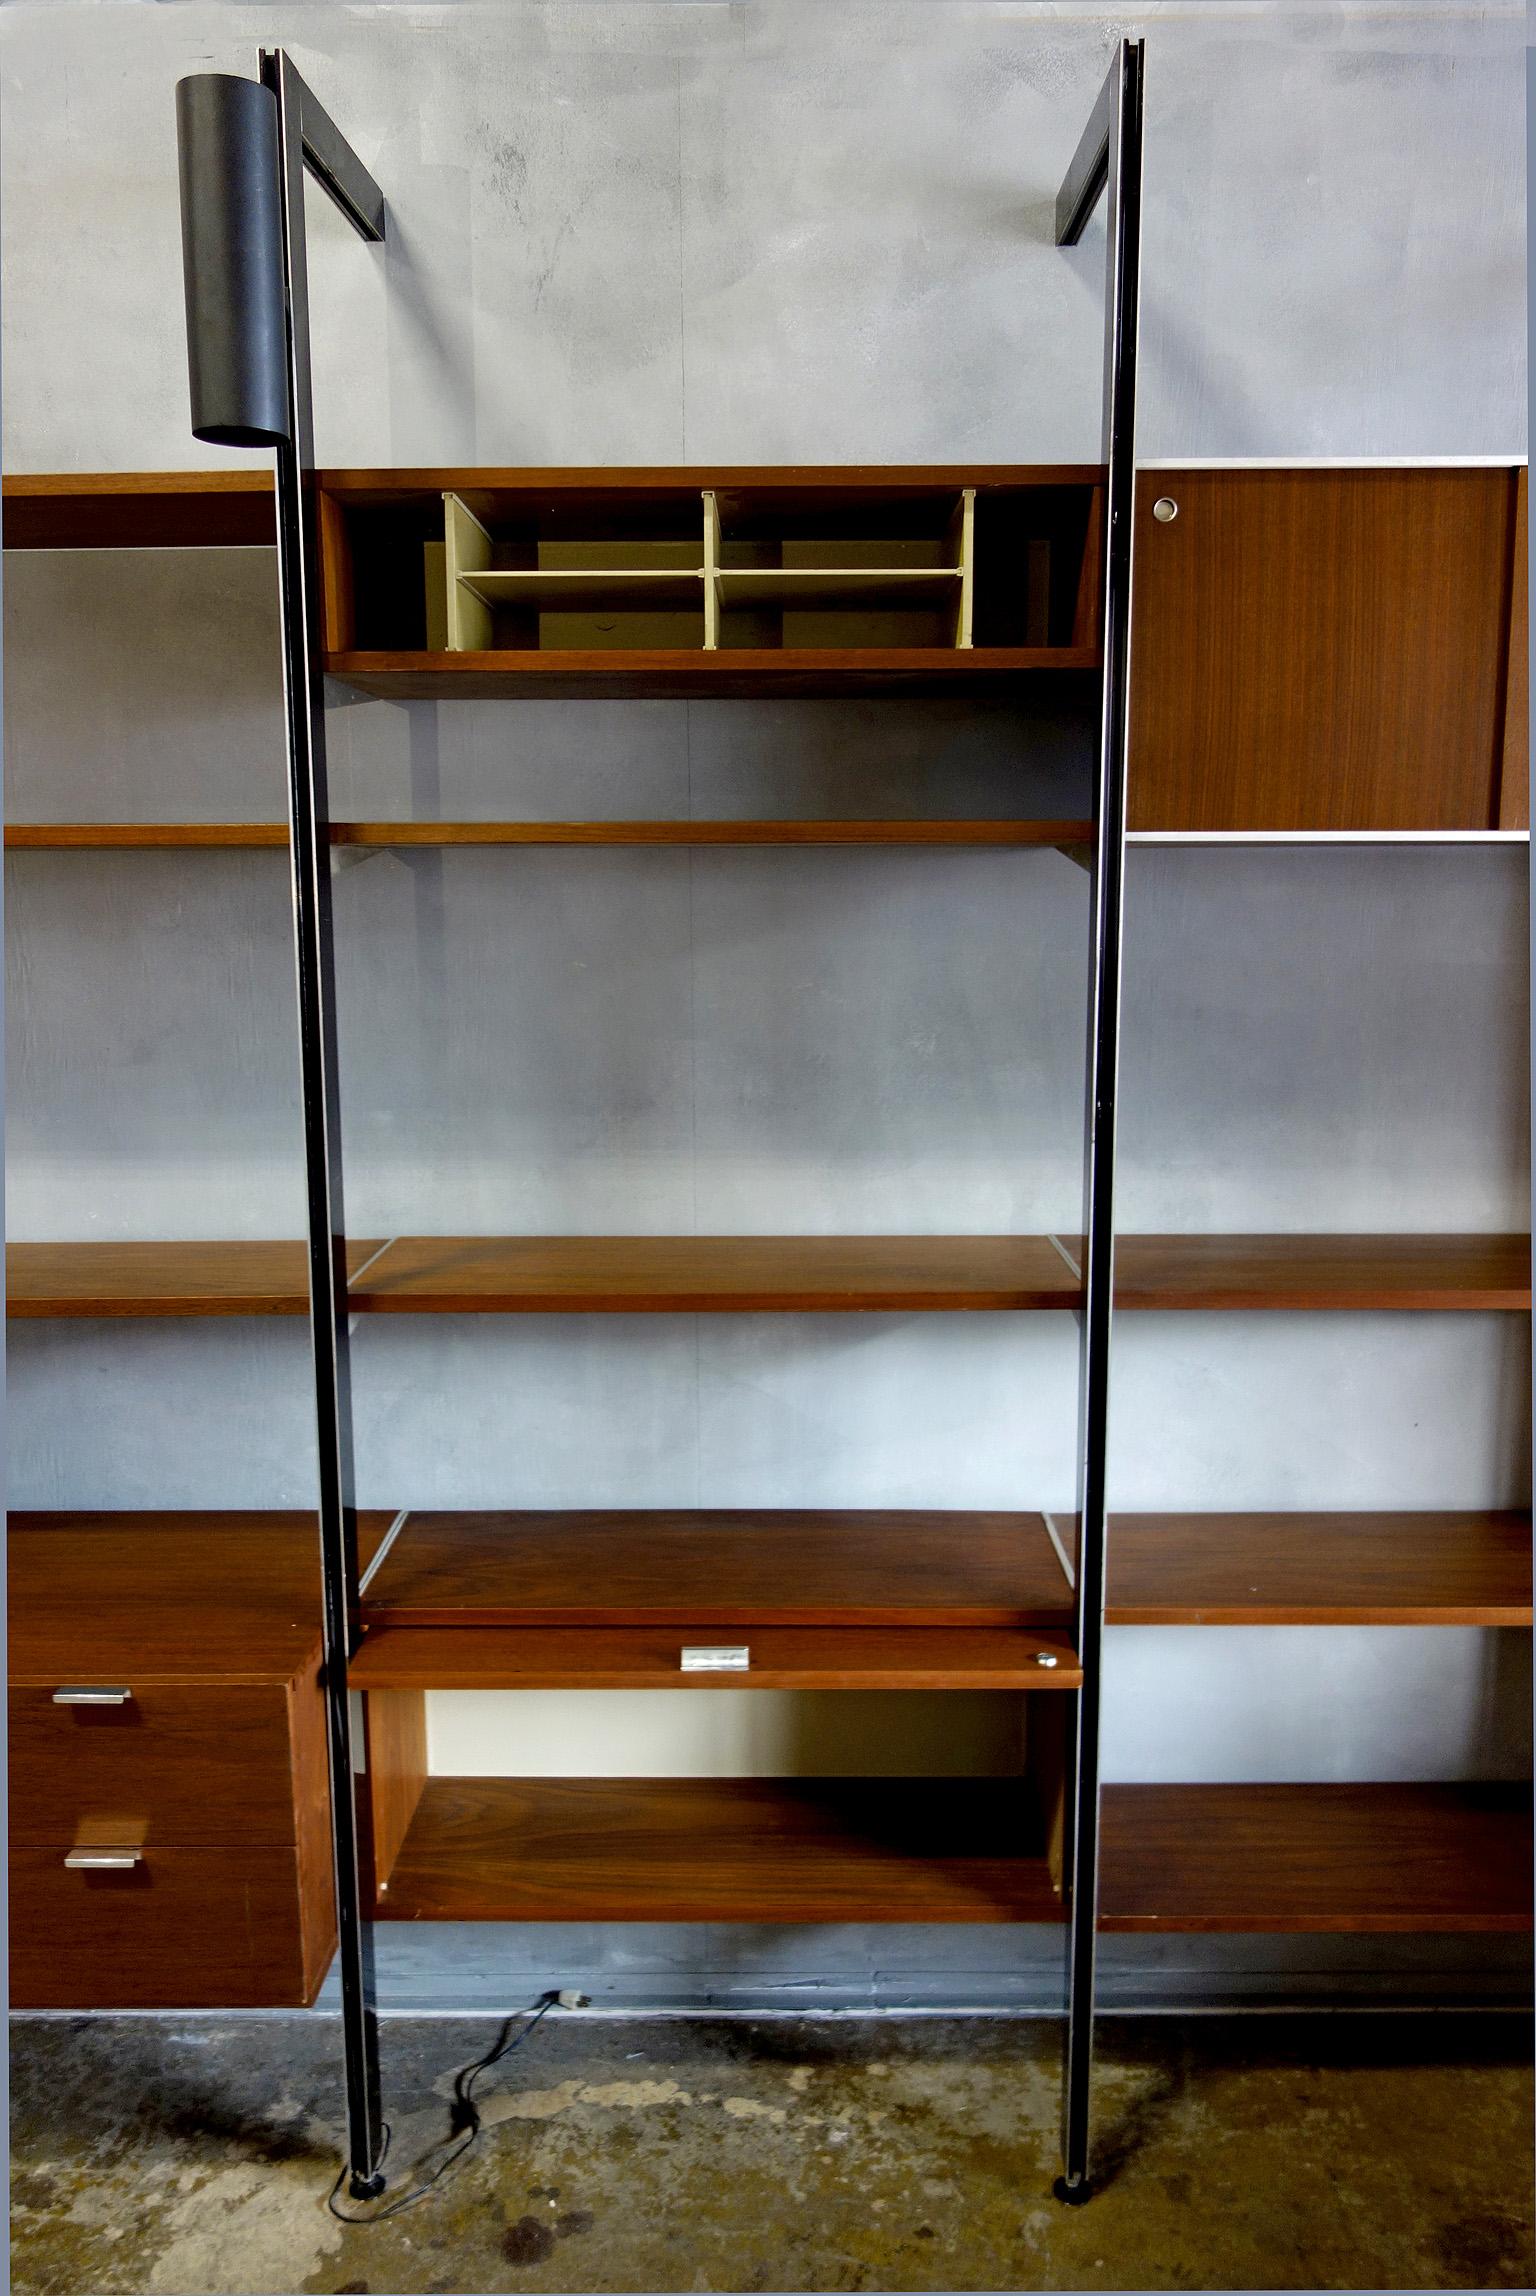 This 4 bay CSS wall unit is a Classic! Features 11 x 12'' shelves, one sliding door cabinet, one 4 drawer cabinet, one two drawer plus file cabinet. One pigeon hole cabinet, and one slide-up door cabinet. Also included are 3 can lamps. All resting